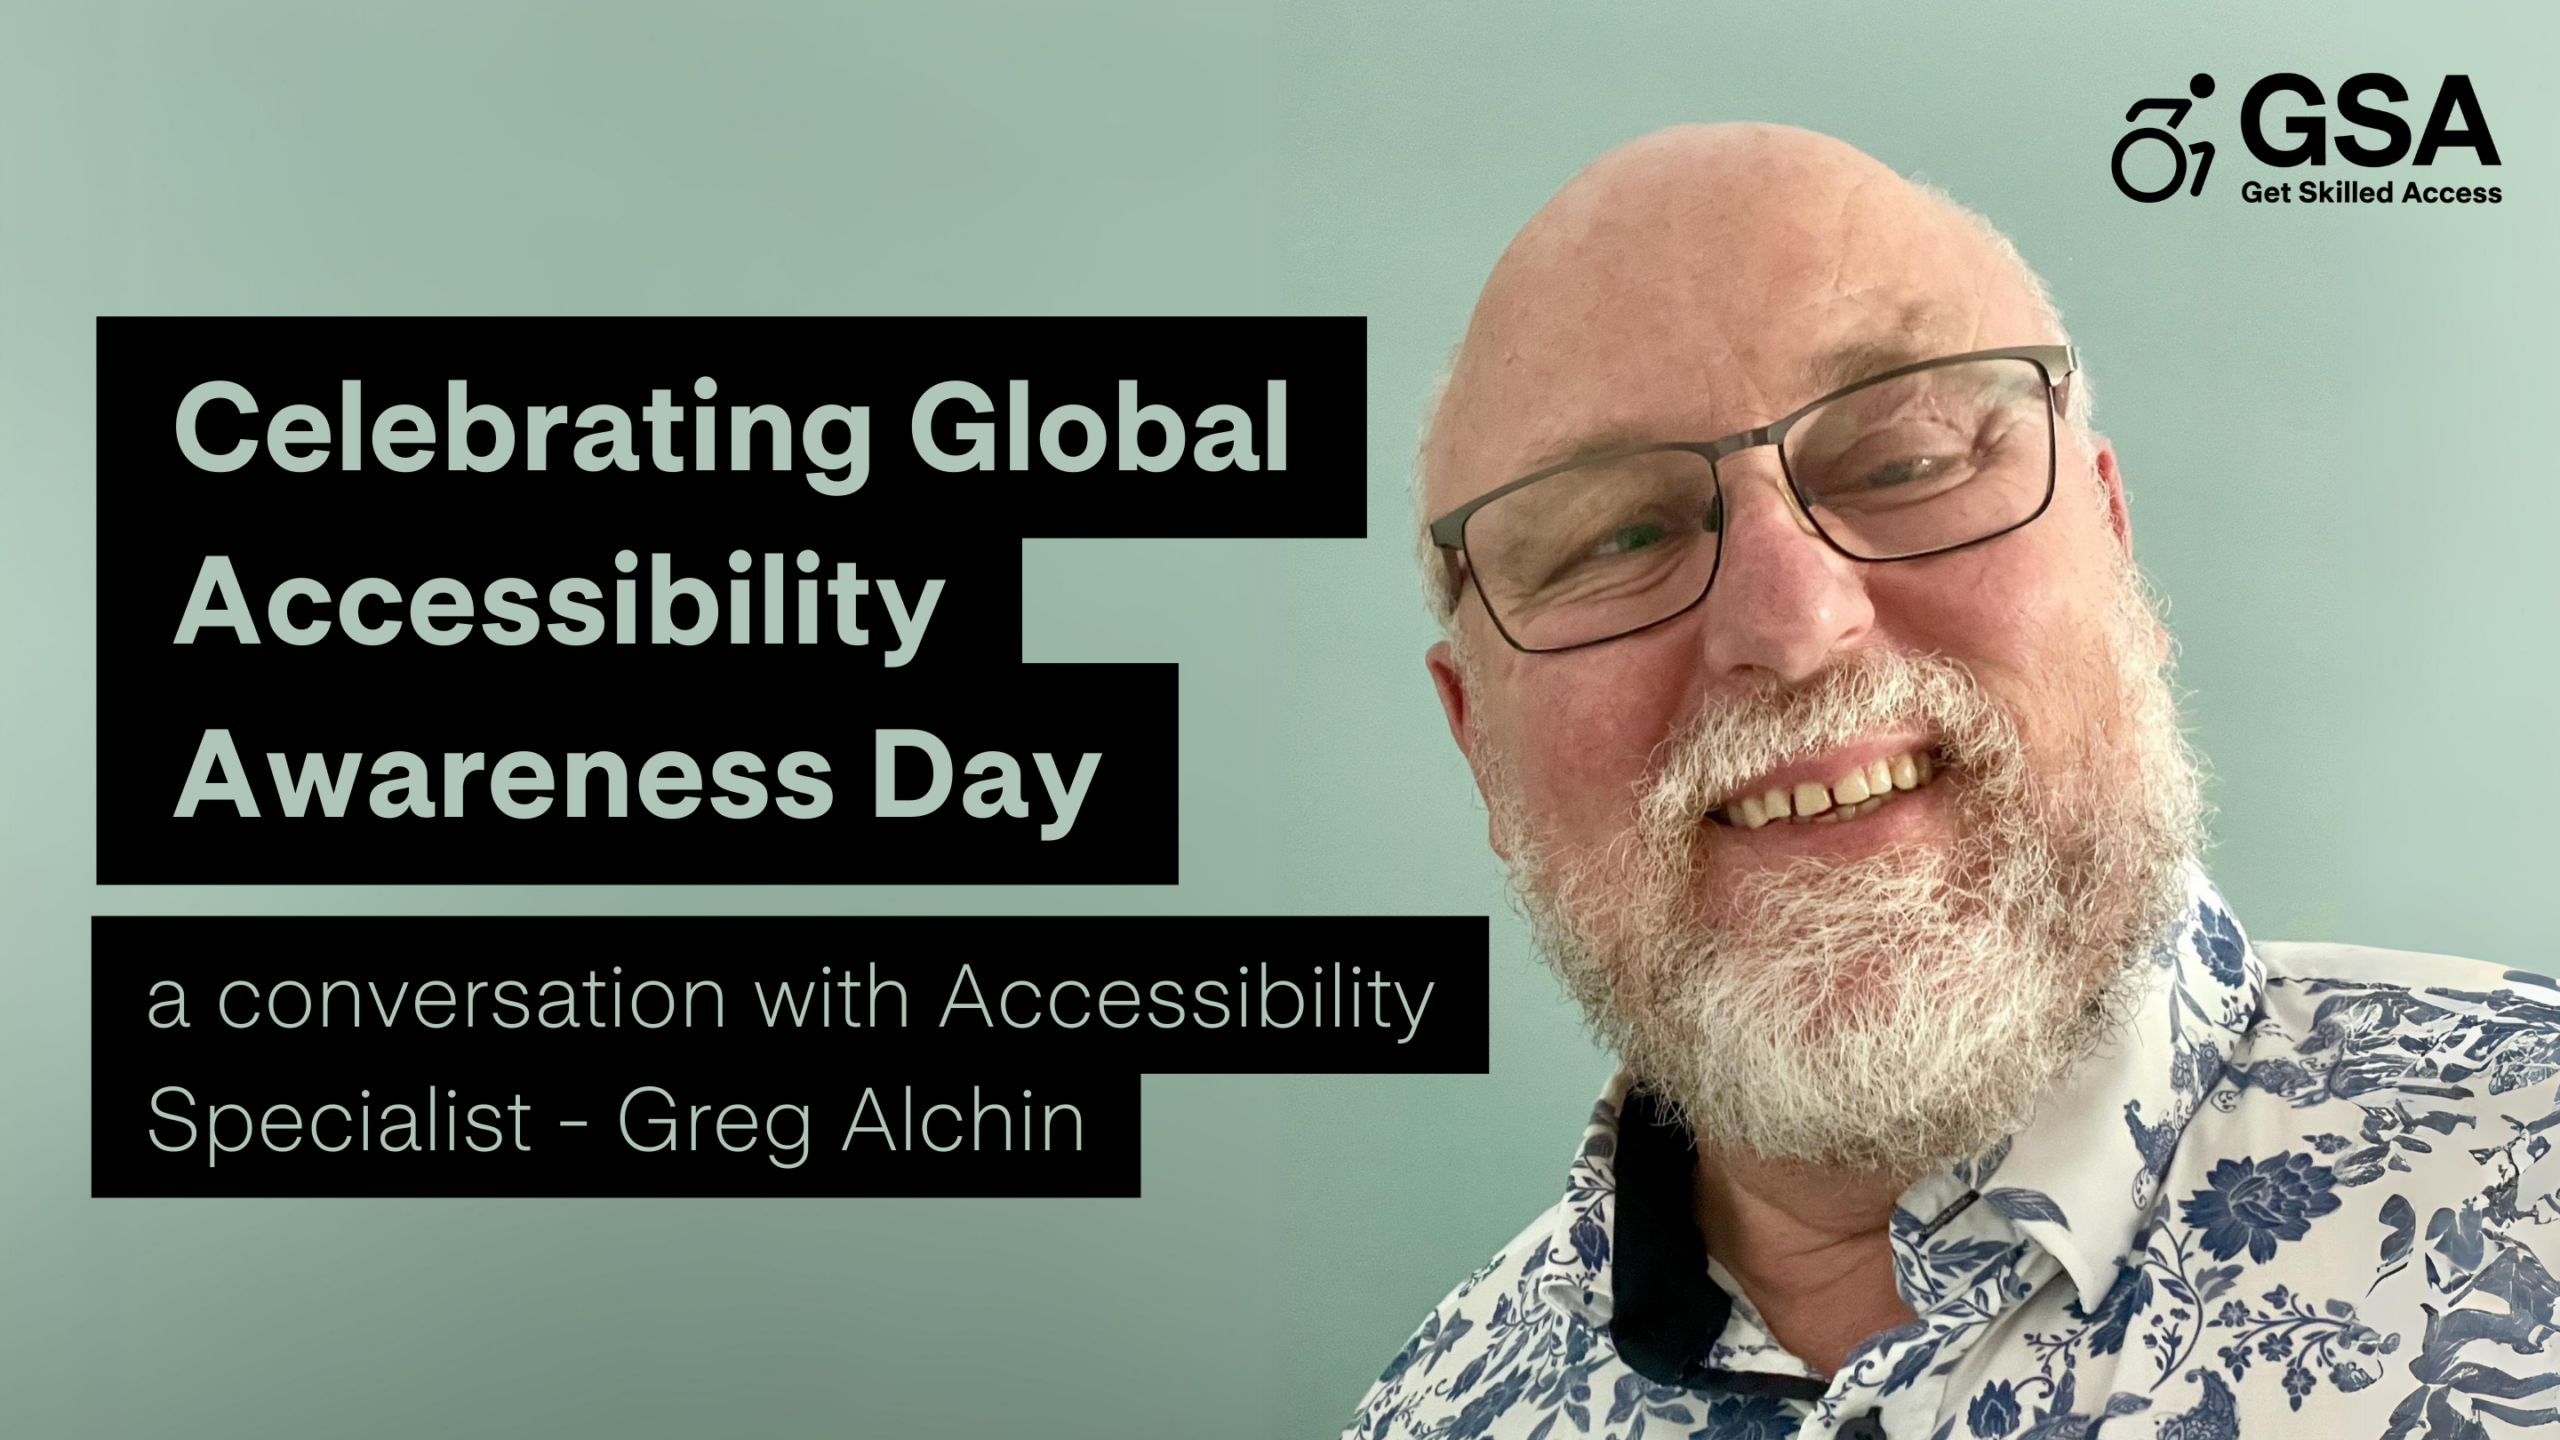 In the selfie, Greg Alchin, a Caucasian male with a white beard, is wearing glasses and smiling as he looks directly at the camera. To the left of the image, the text reads: "Celebrating Global Accessibility Awareness Day - a conversation with Accessibility Specialist - Greg Alchin."